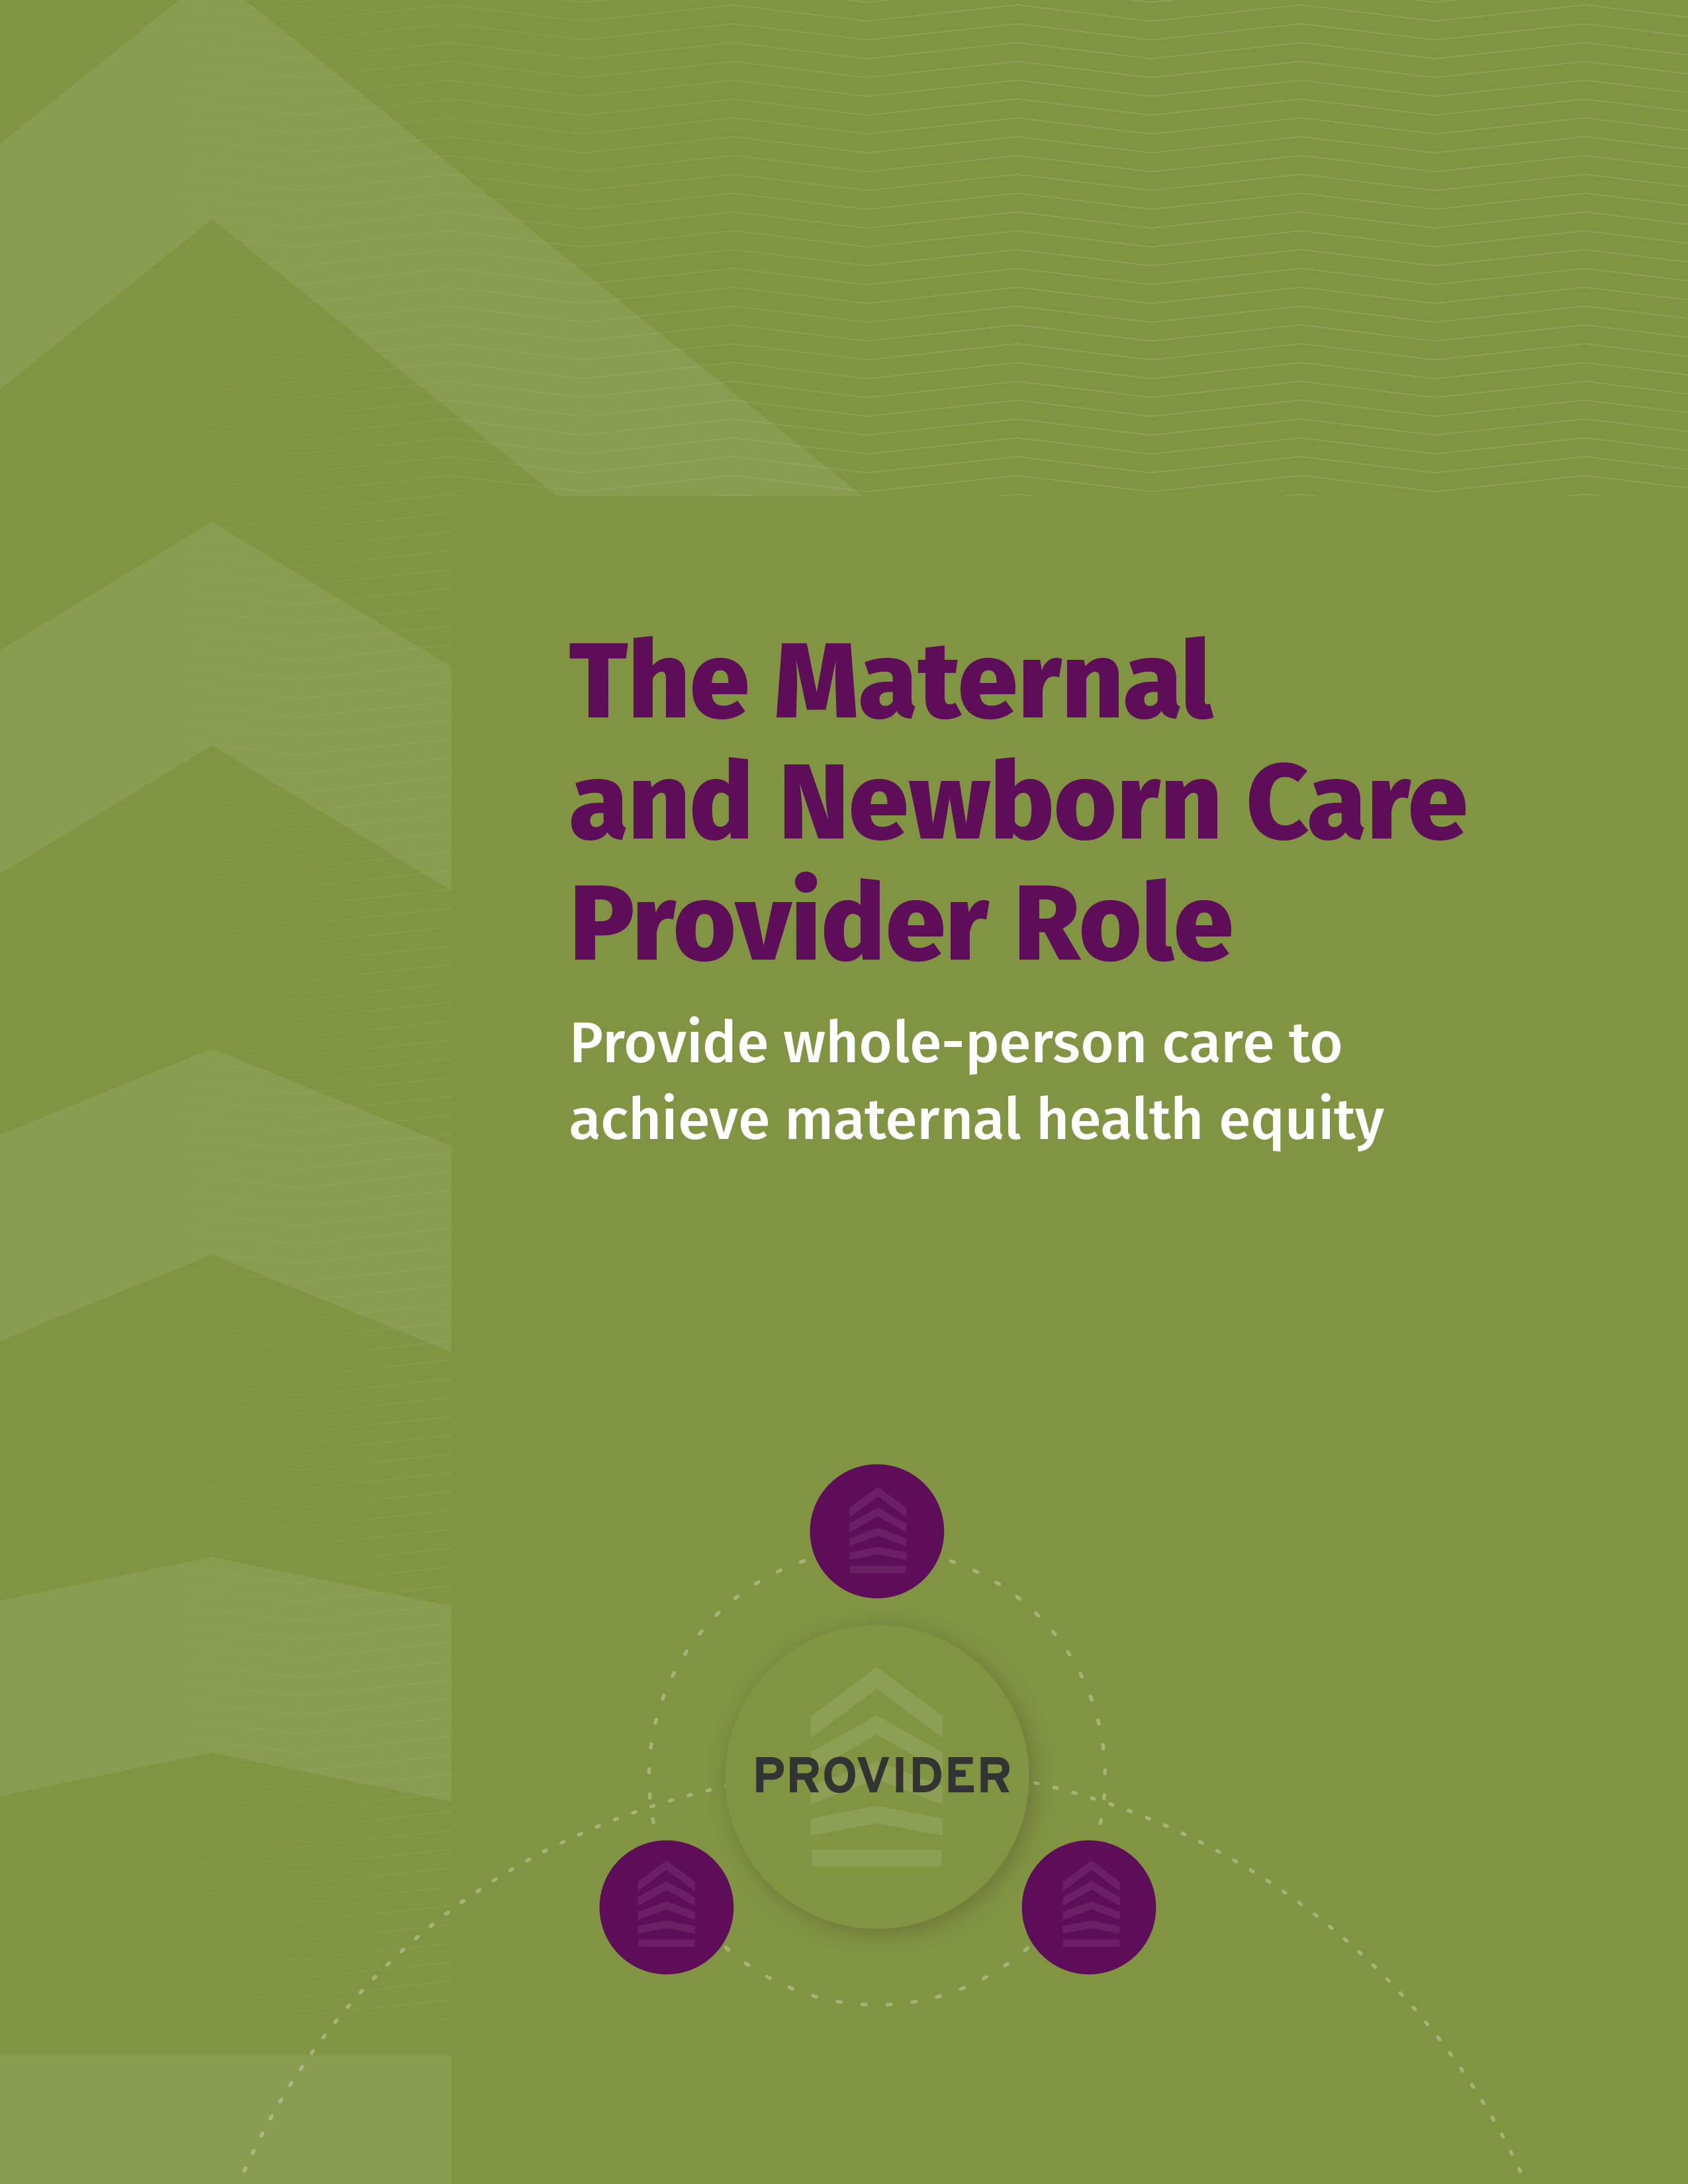 The Maternal and Newborn Care Provider Role